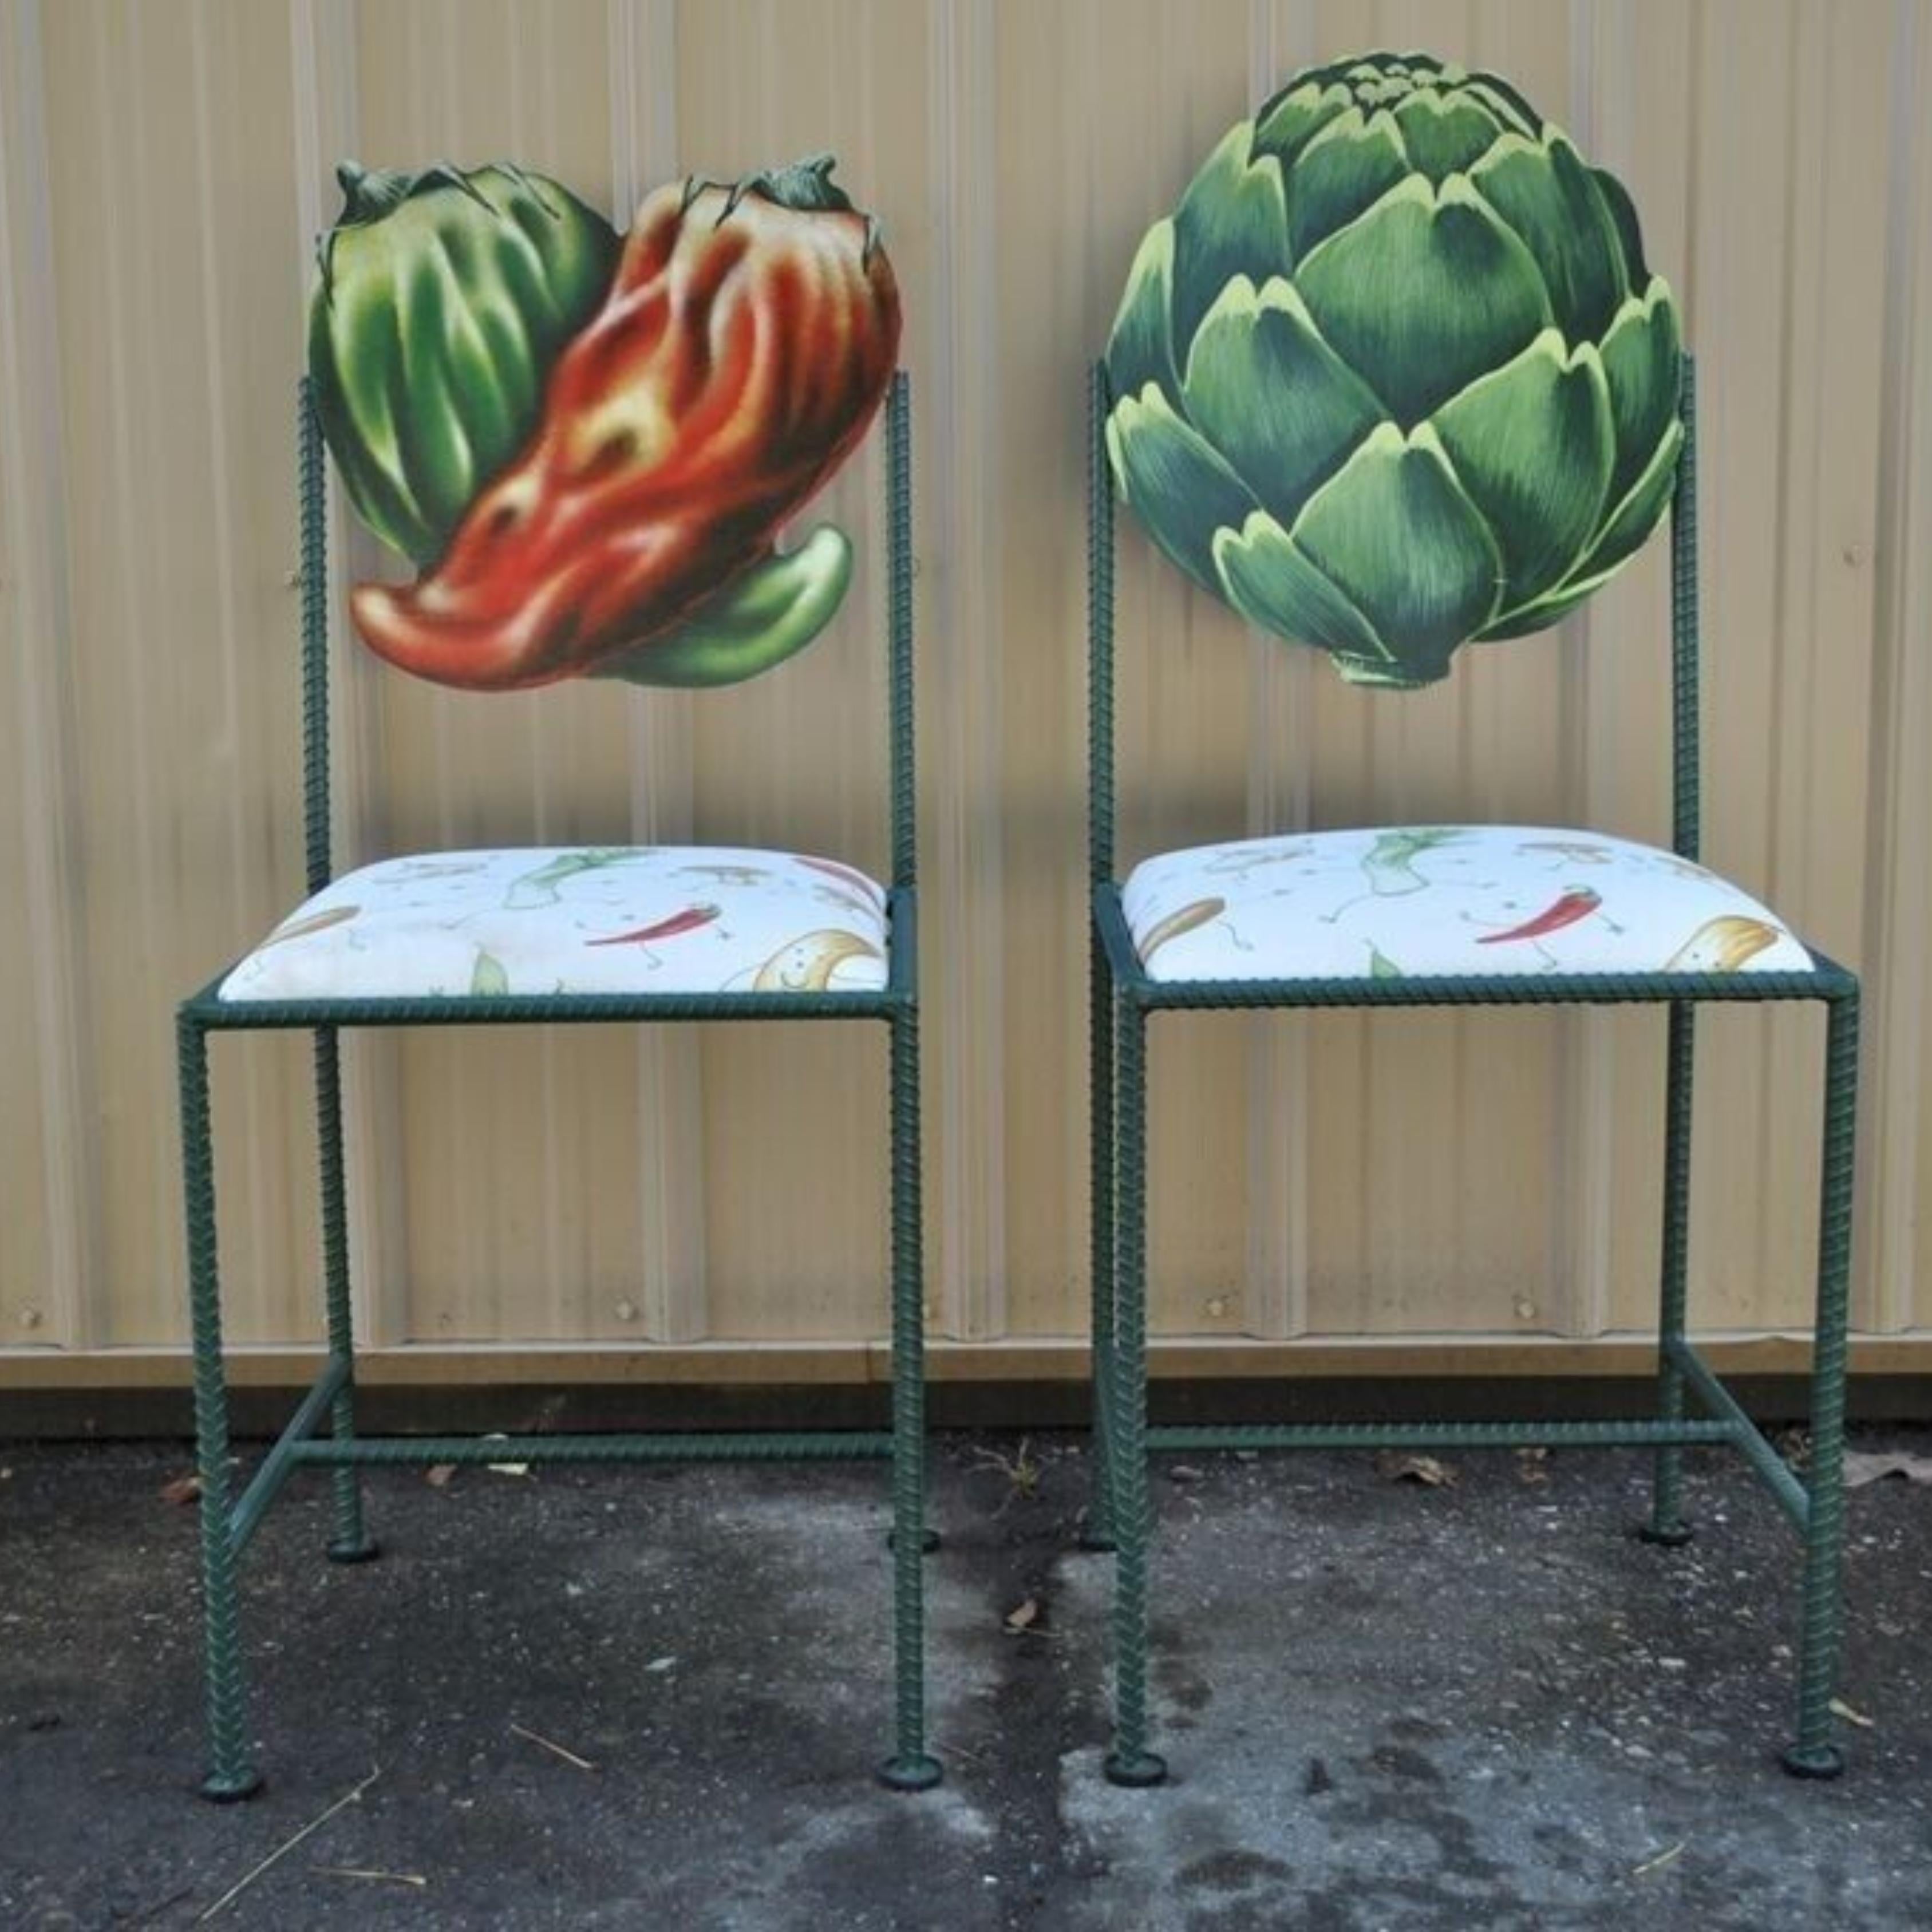 Hollywood Regency Custom Painted Peppers & Artichoke Bistro Side Chairs - a Pair. Item featured has a painted rear, great style and form. Signature by unknown artist. Circa Late 20th Century.
Measurements: 
Pepper Chair: 37.75